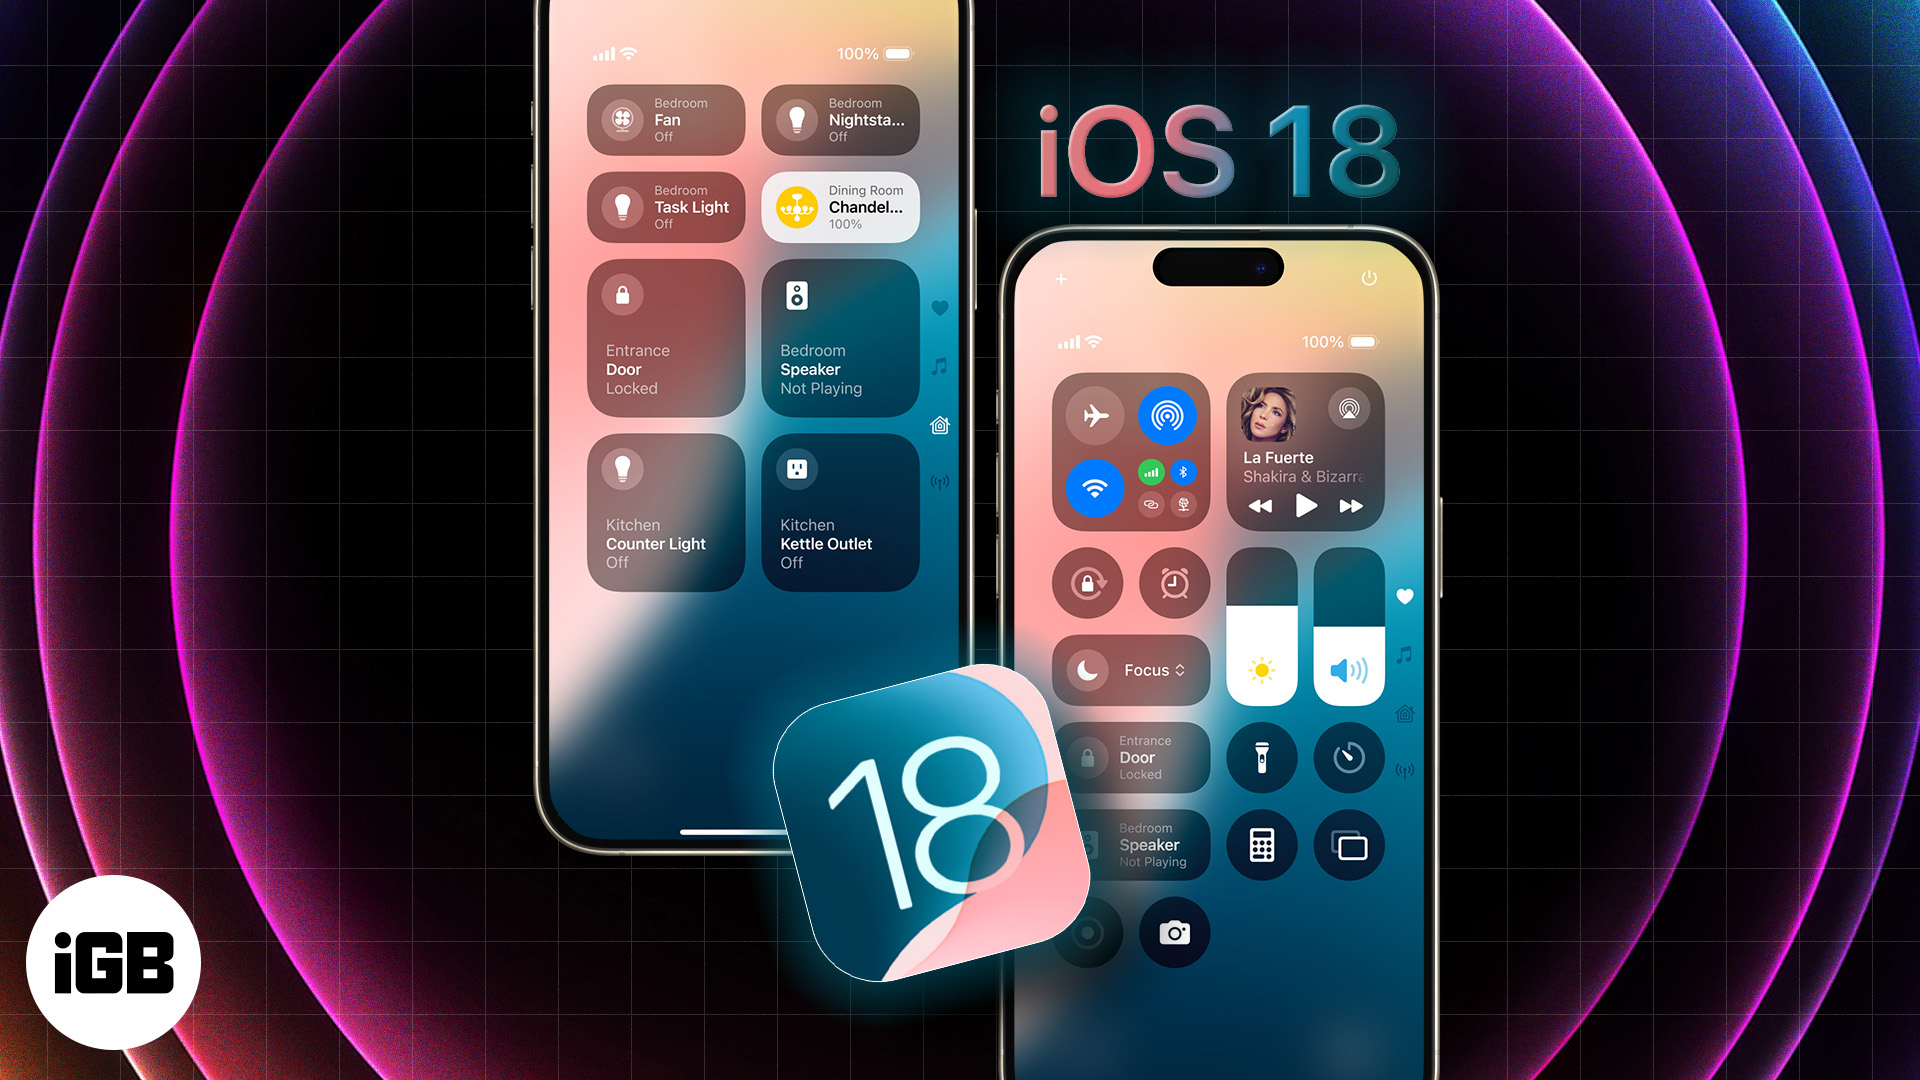 How to use and customize Control Center in iOS 18 on iPhone